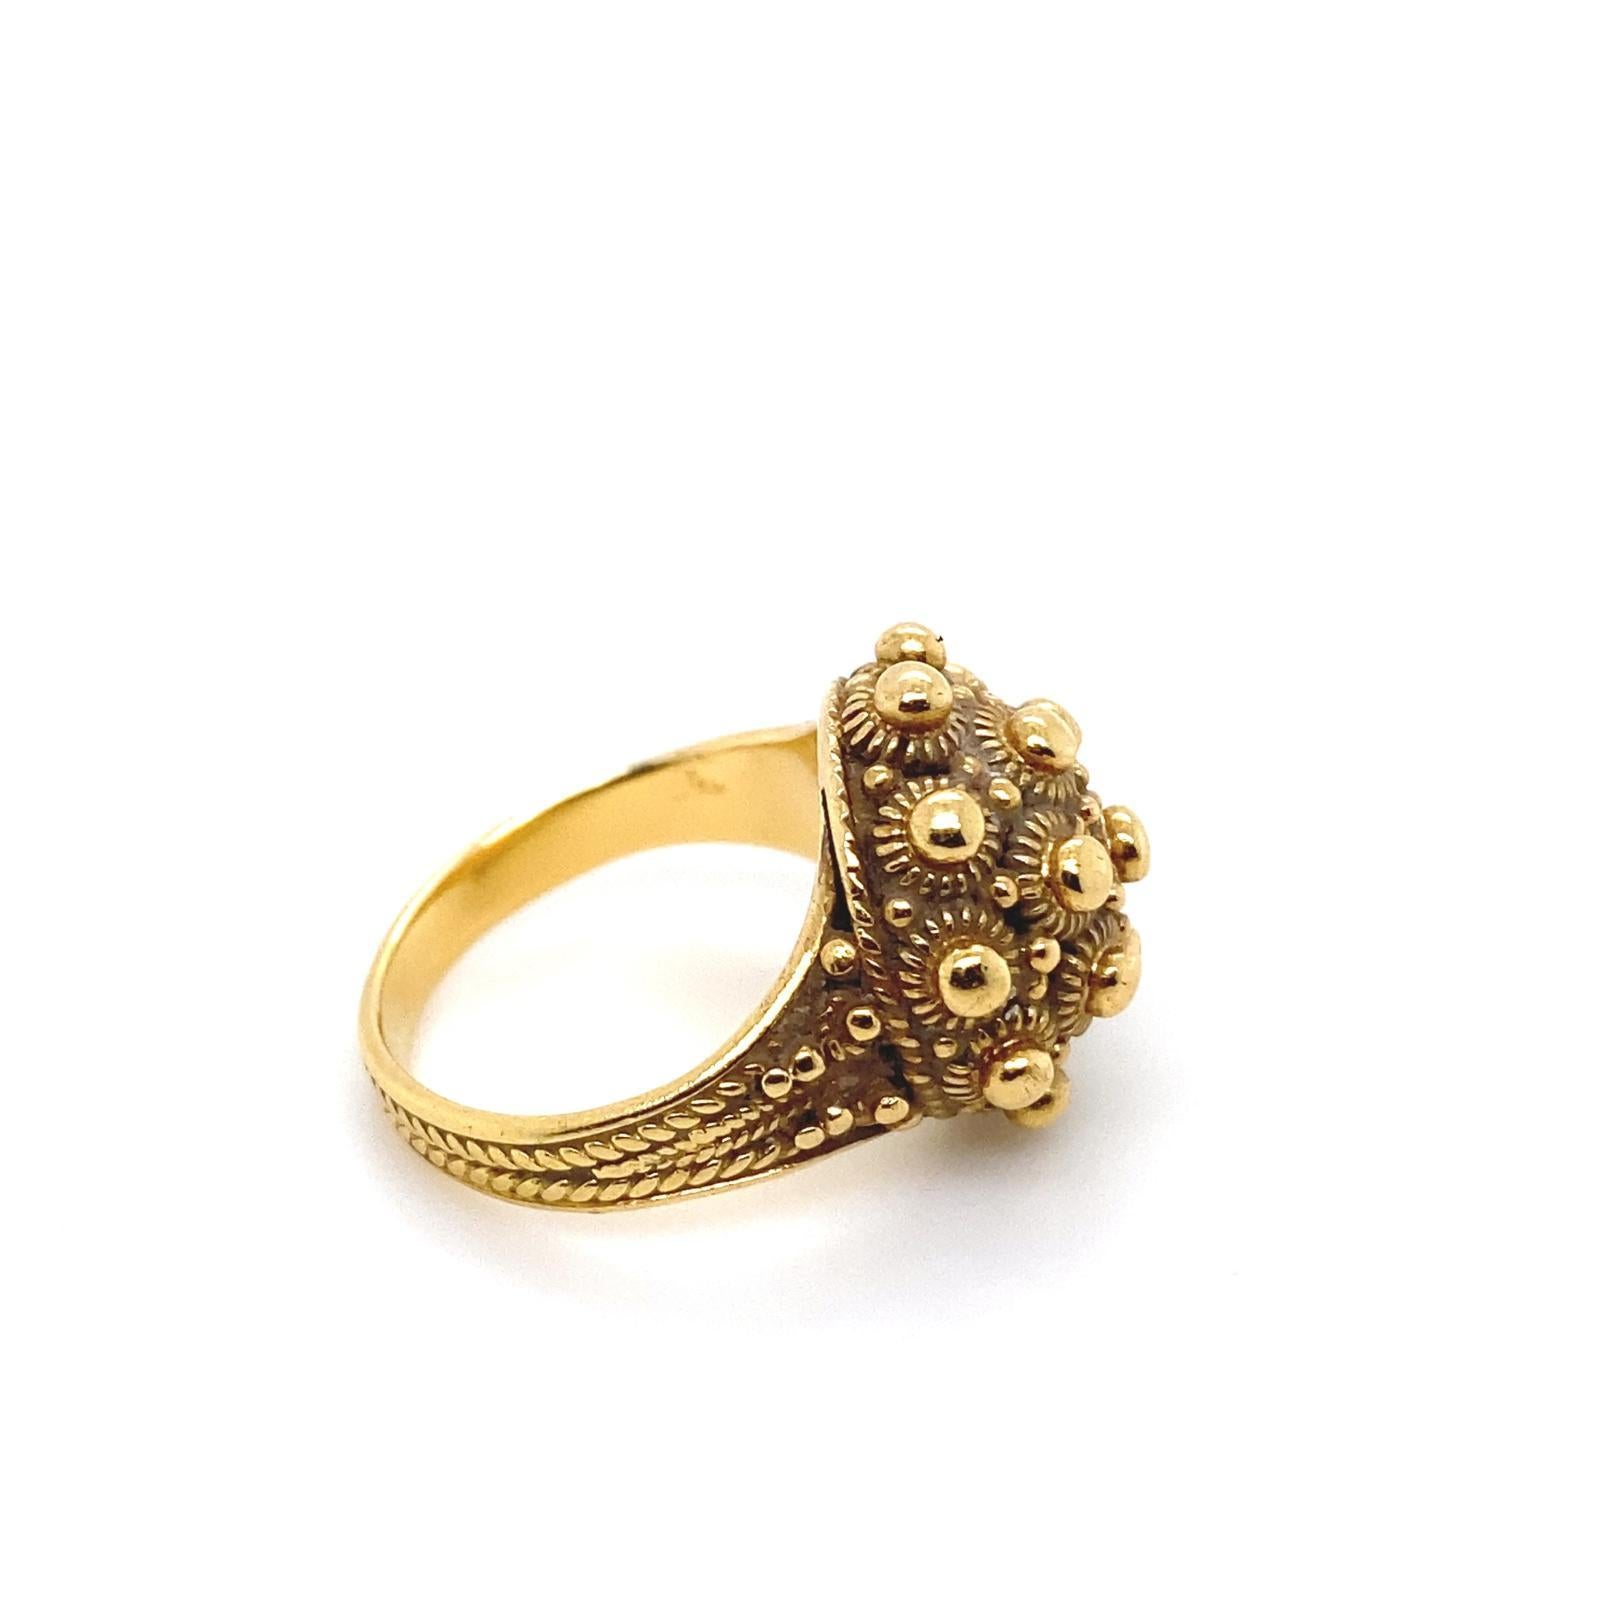 Etruscan Revival Etruscan Style 18 Karat Yellow Gold Ring For Sale